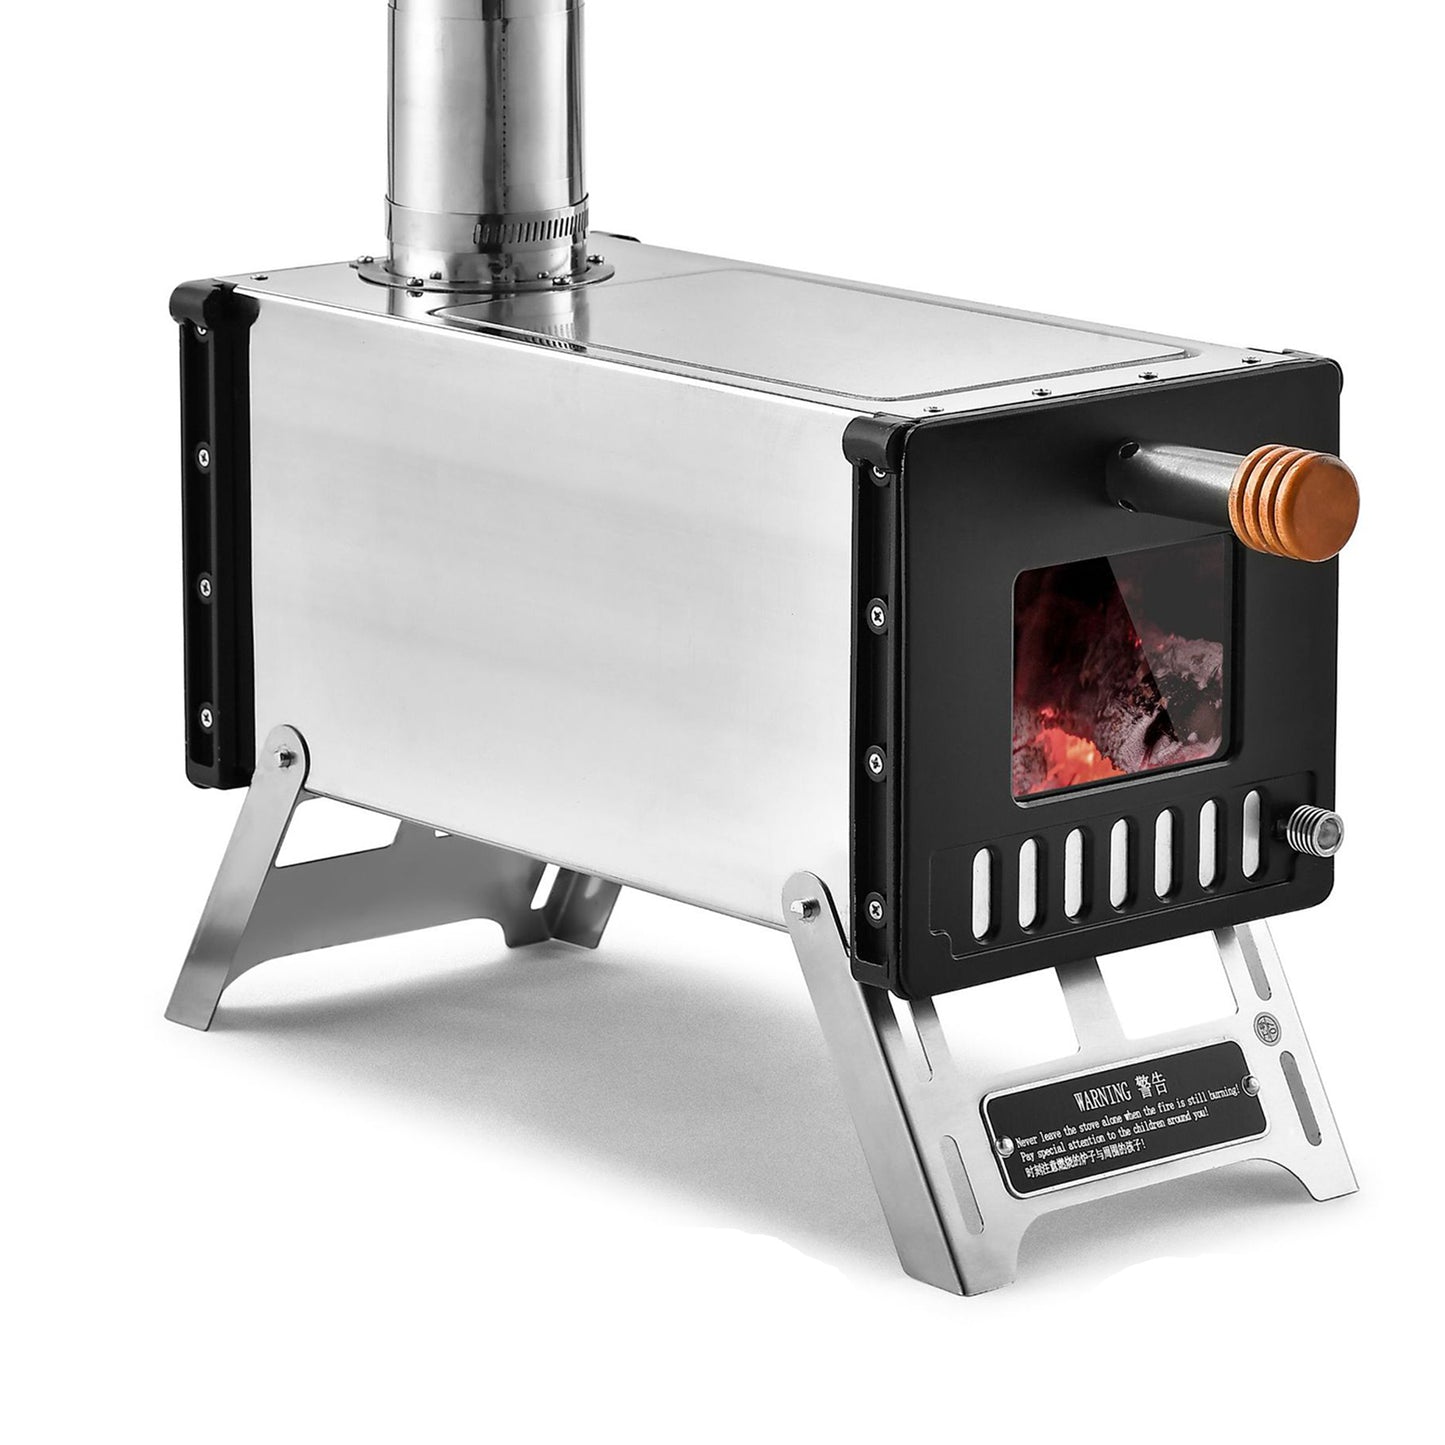 Stainless Steel Portable Wood Burning Stove with Chimney Pipes for Camping and Heating, 50 cm.